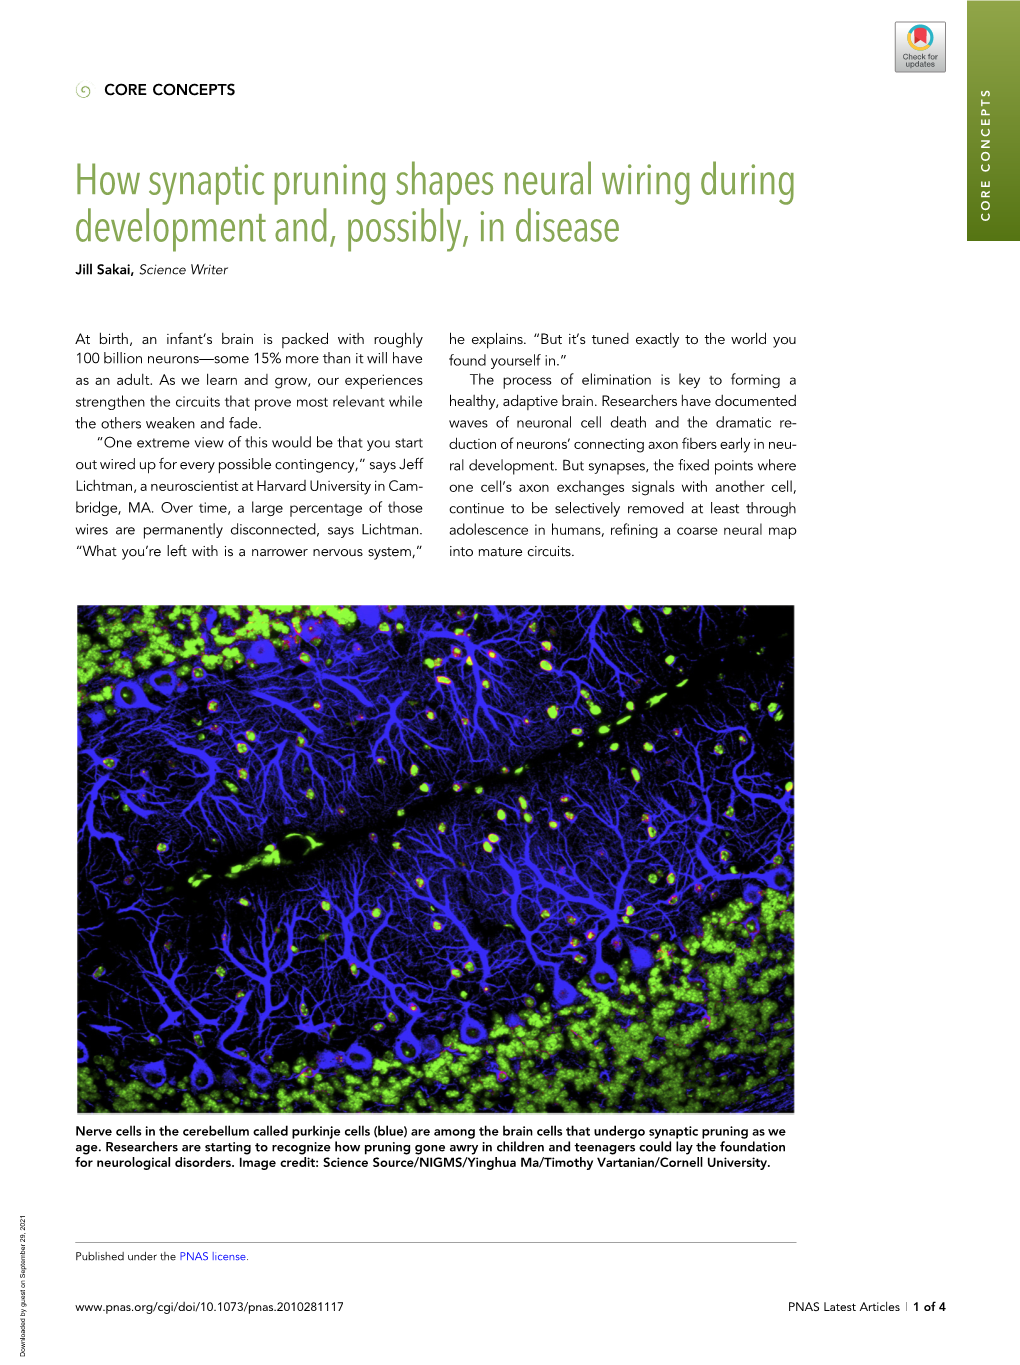 How Synaptic Pruning Shapes Neural Wiring During Development And, Possibly, in Disease CORE CONCEPTS Jill Sakai, Science Writer